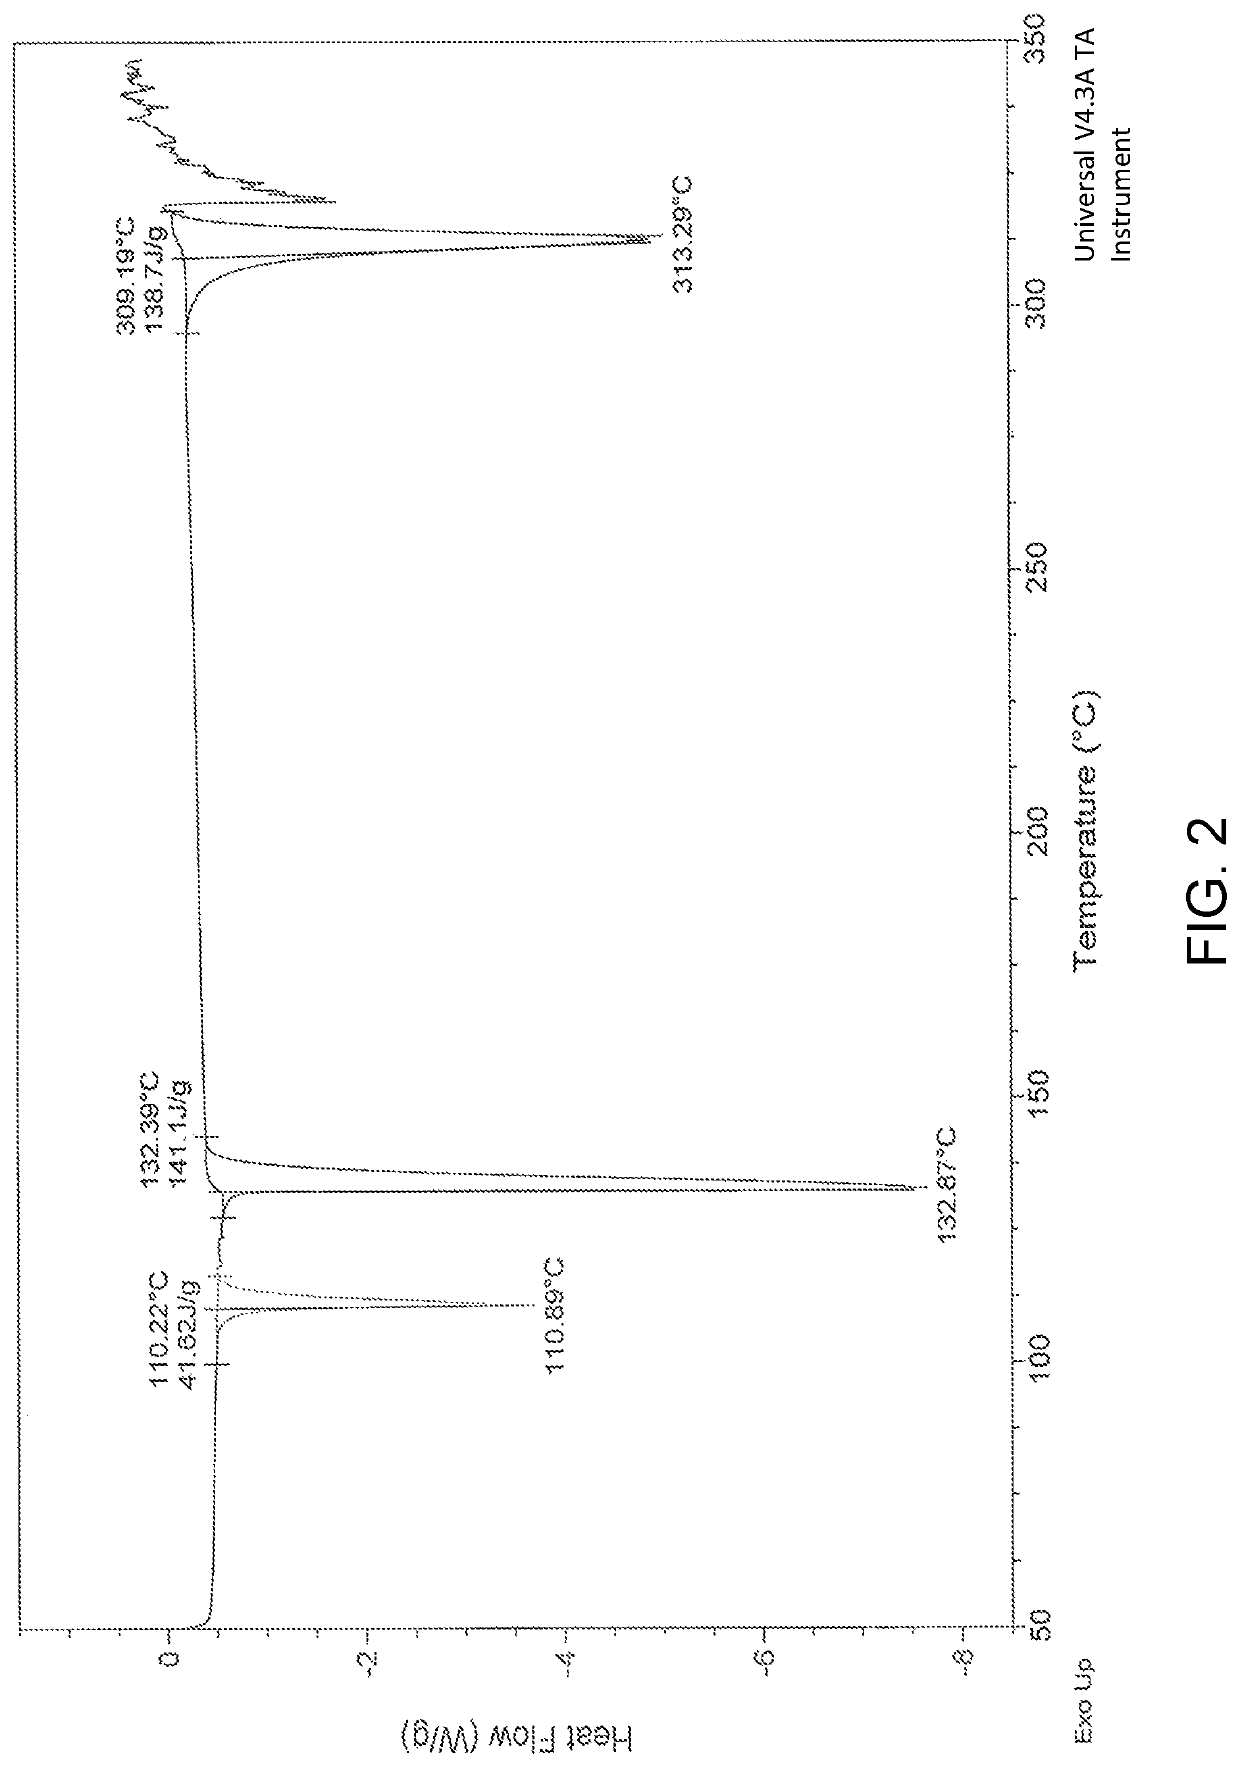 Process for the preparation of pazopanib or a pharmaceutically acceptable salt thereof